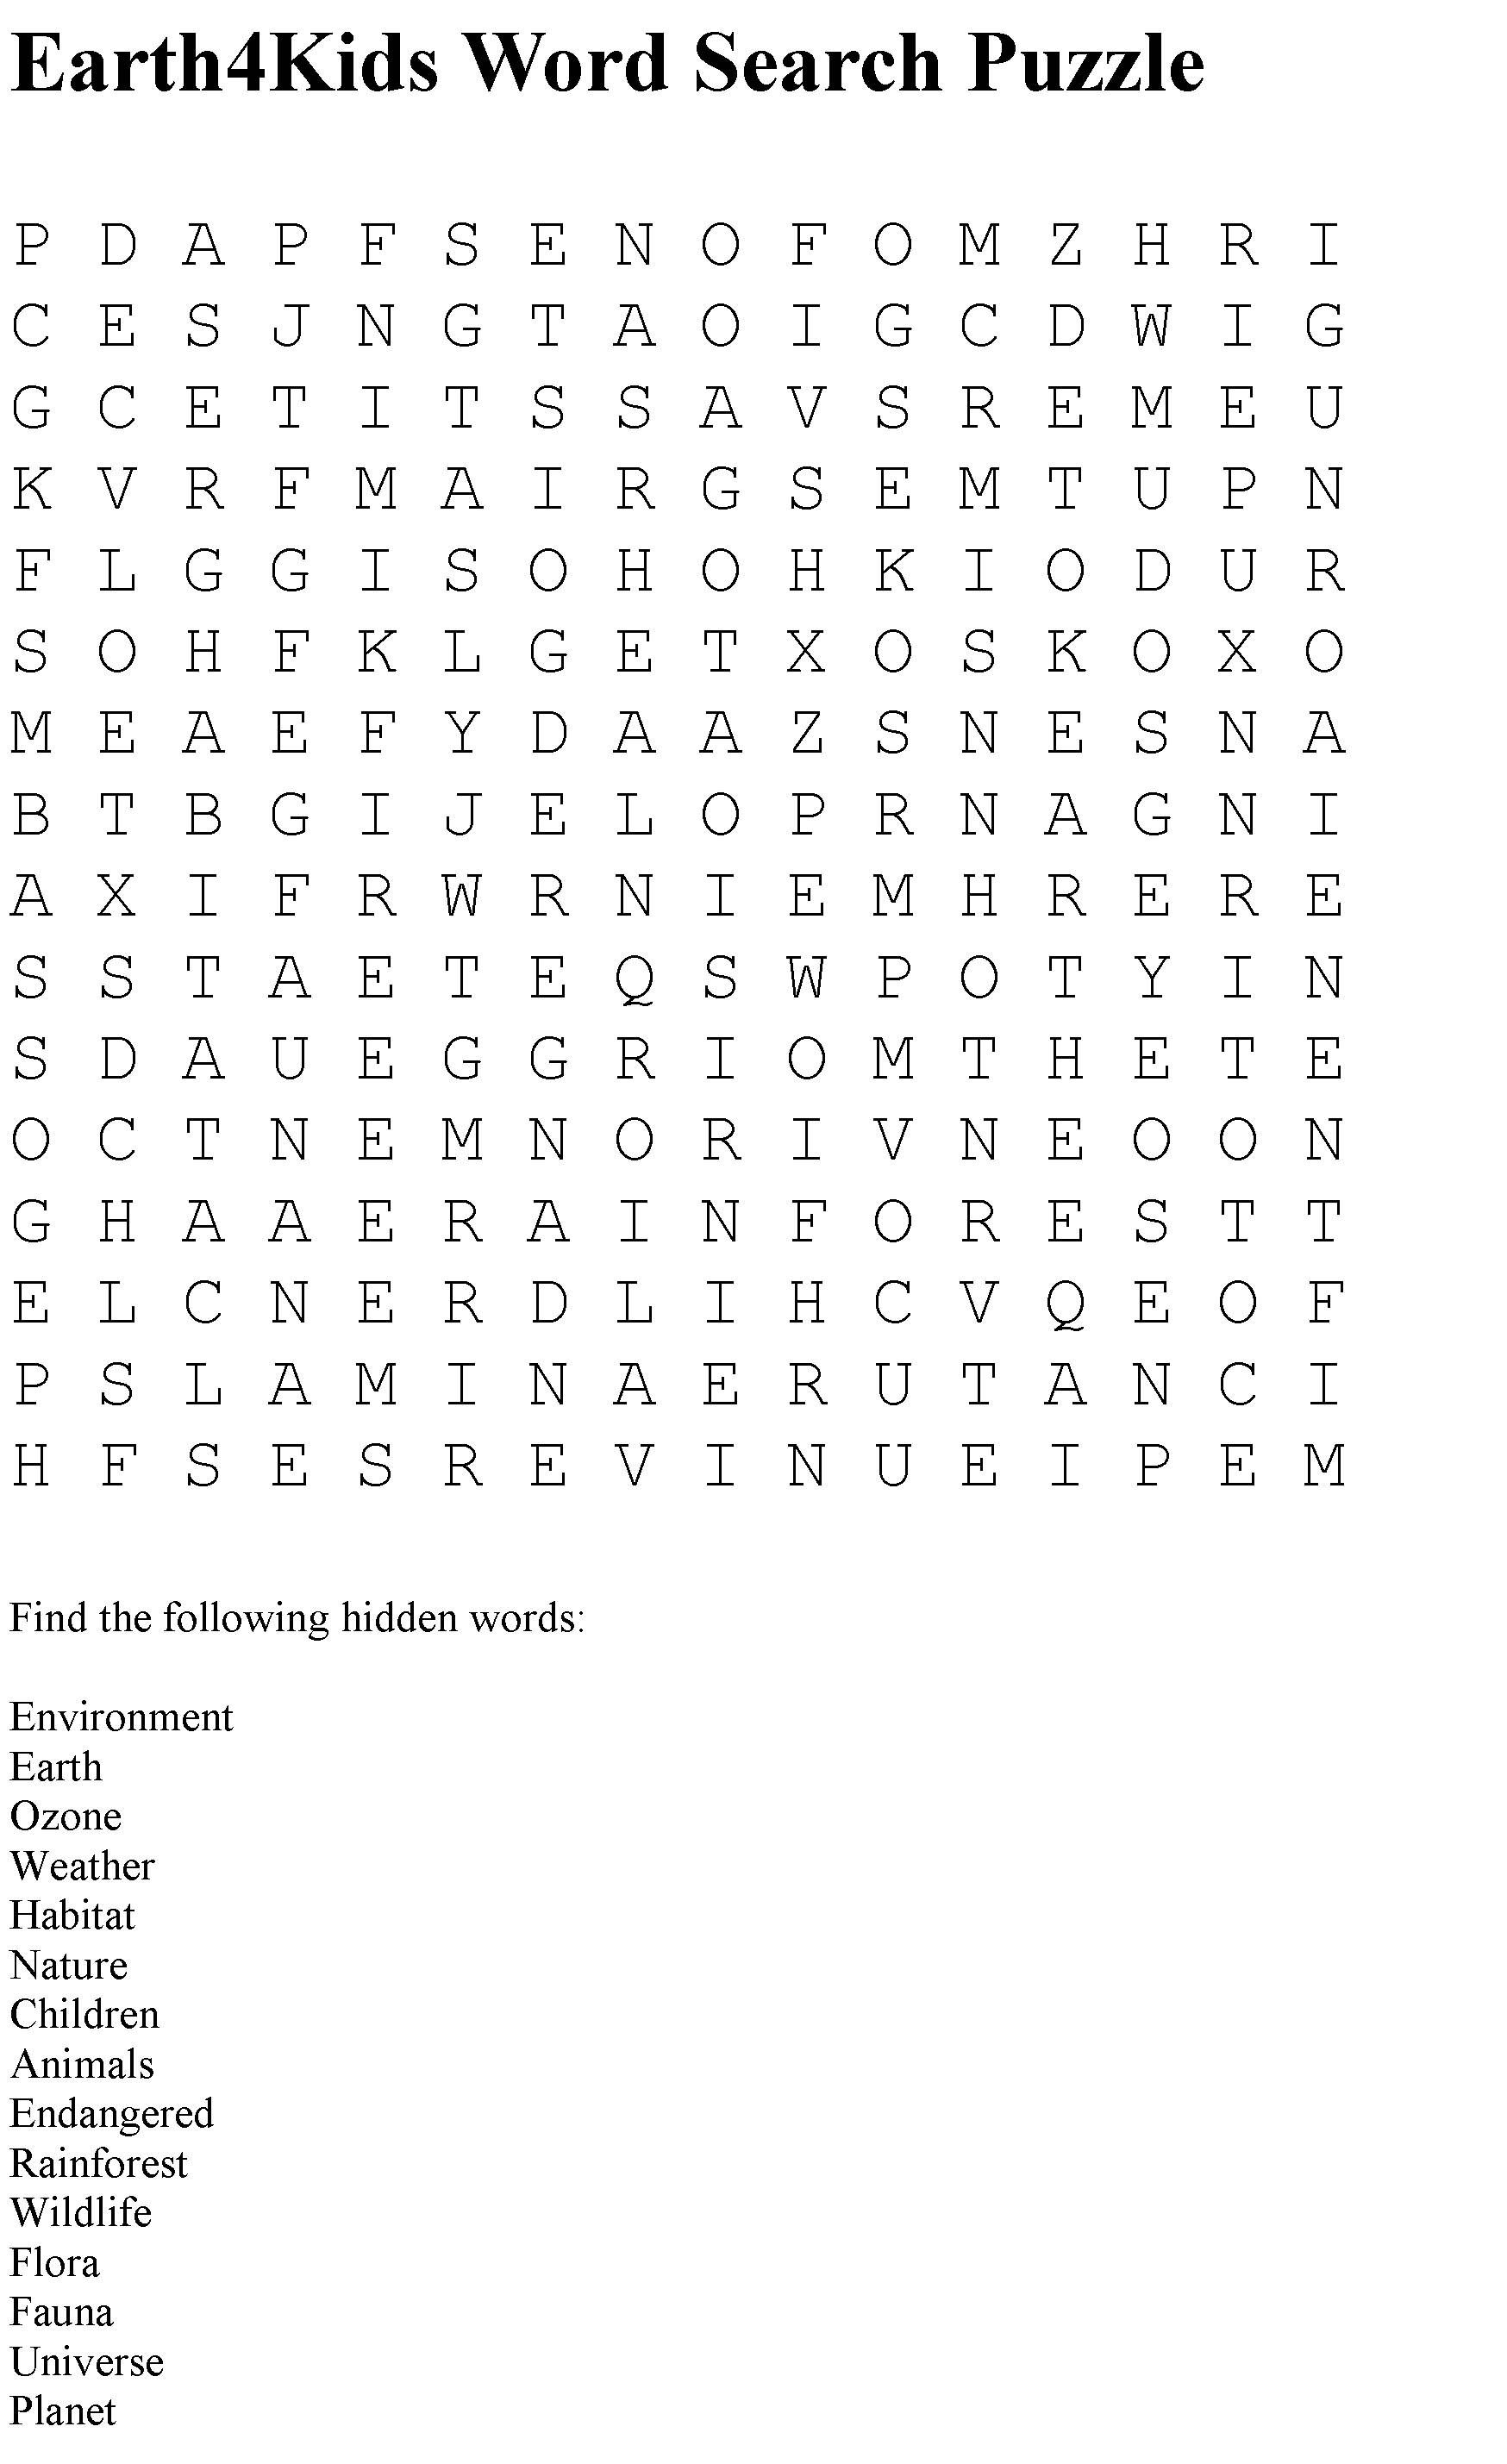 Word Search - Environment | Summer Holidays - Week 3 - &amp;quot;green&amp;quot; Week - Printable Grey&amp;amp;#039;s Anatomy Crossword Puzzles